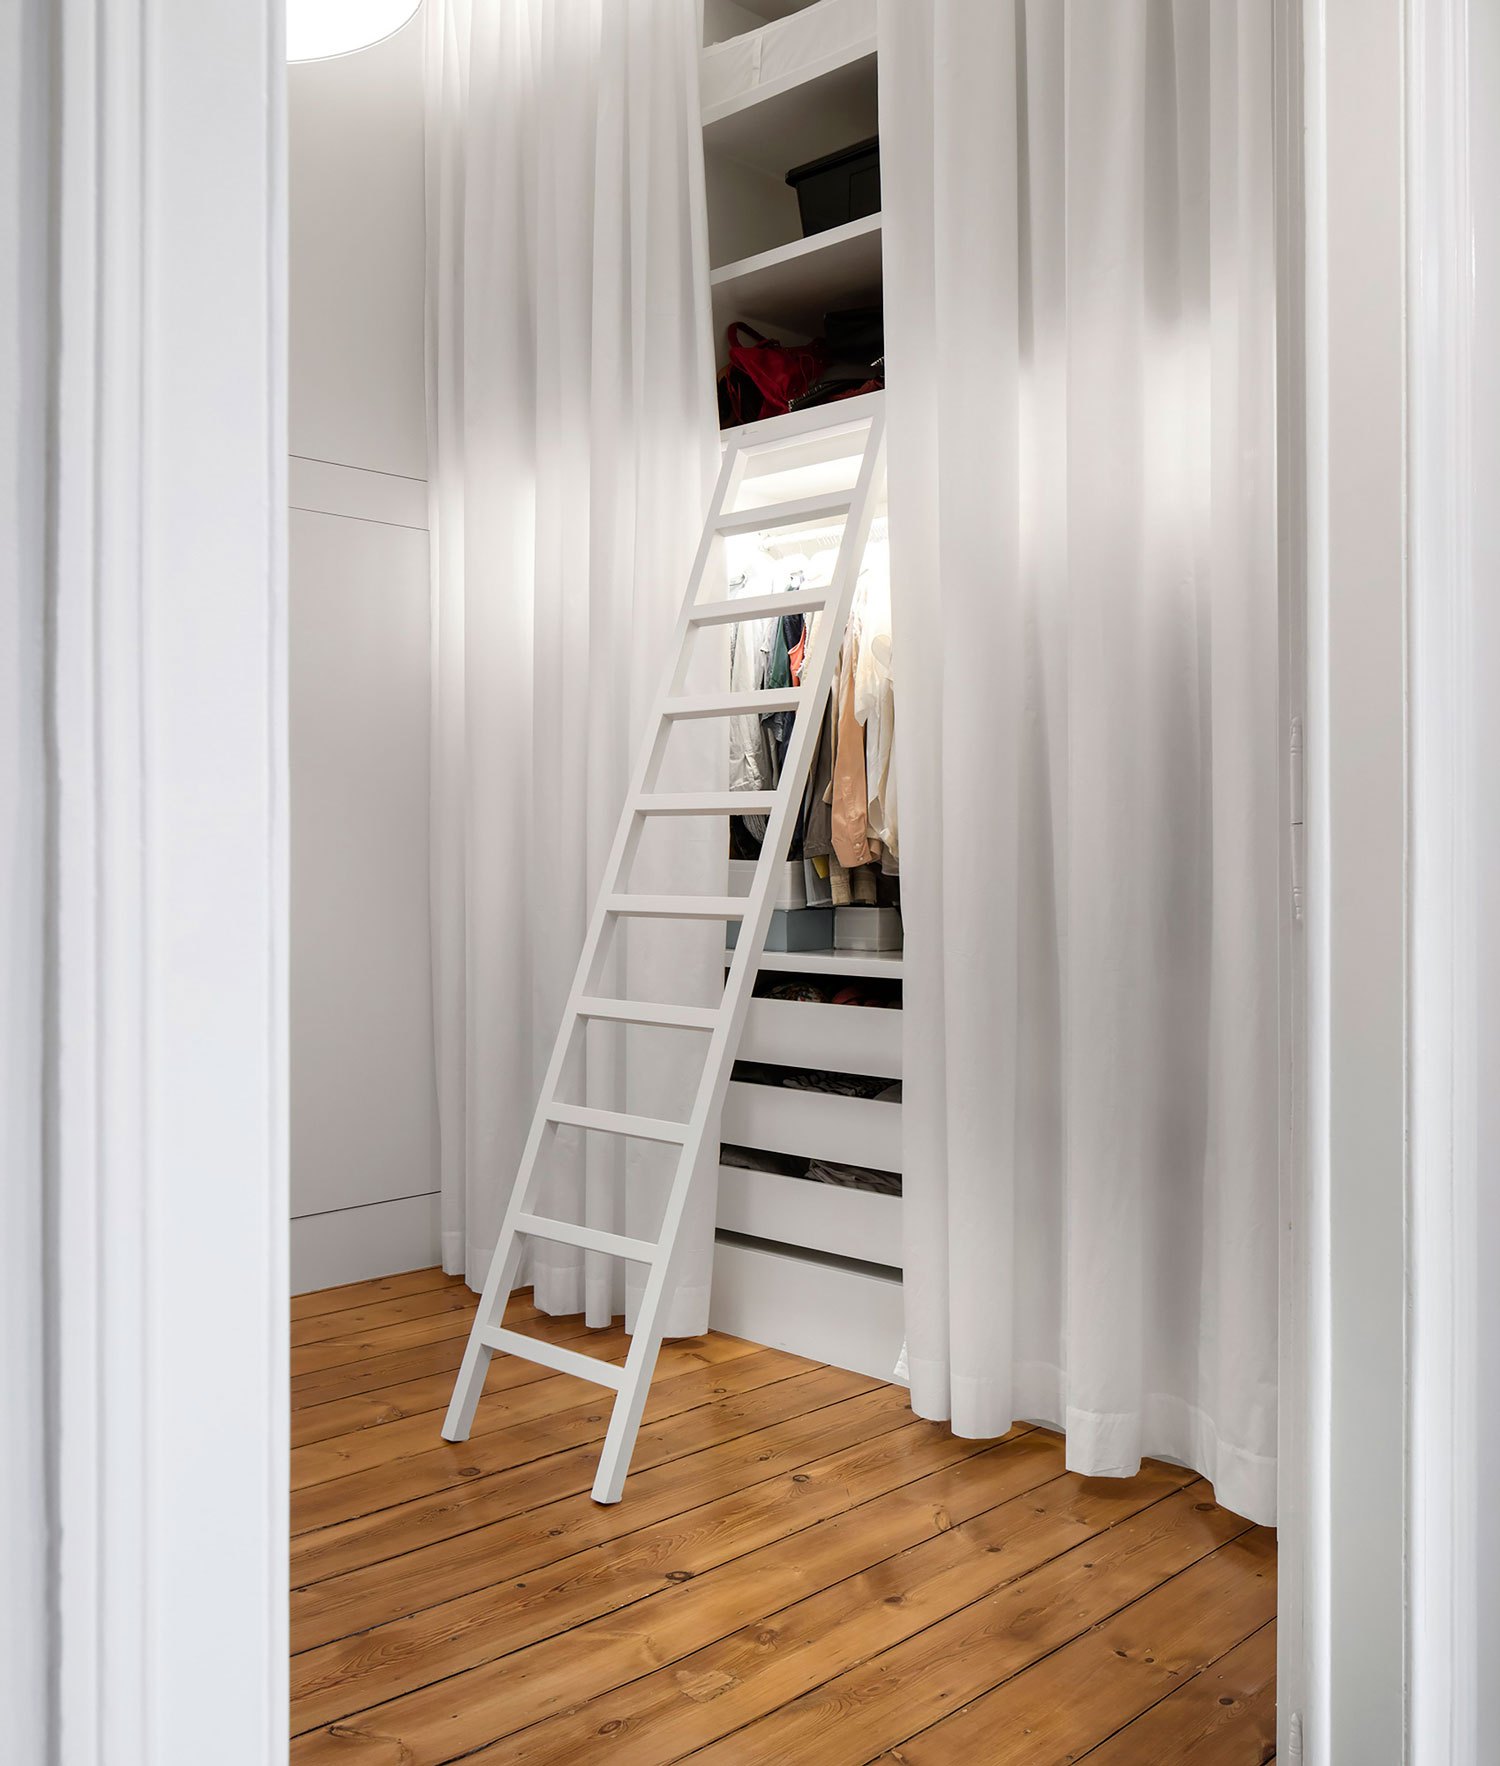 There are several inner rooms that act as wardrobes and storage spaces for different rooms, what an interesting solution